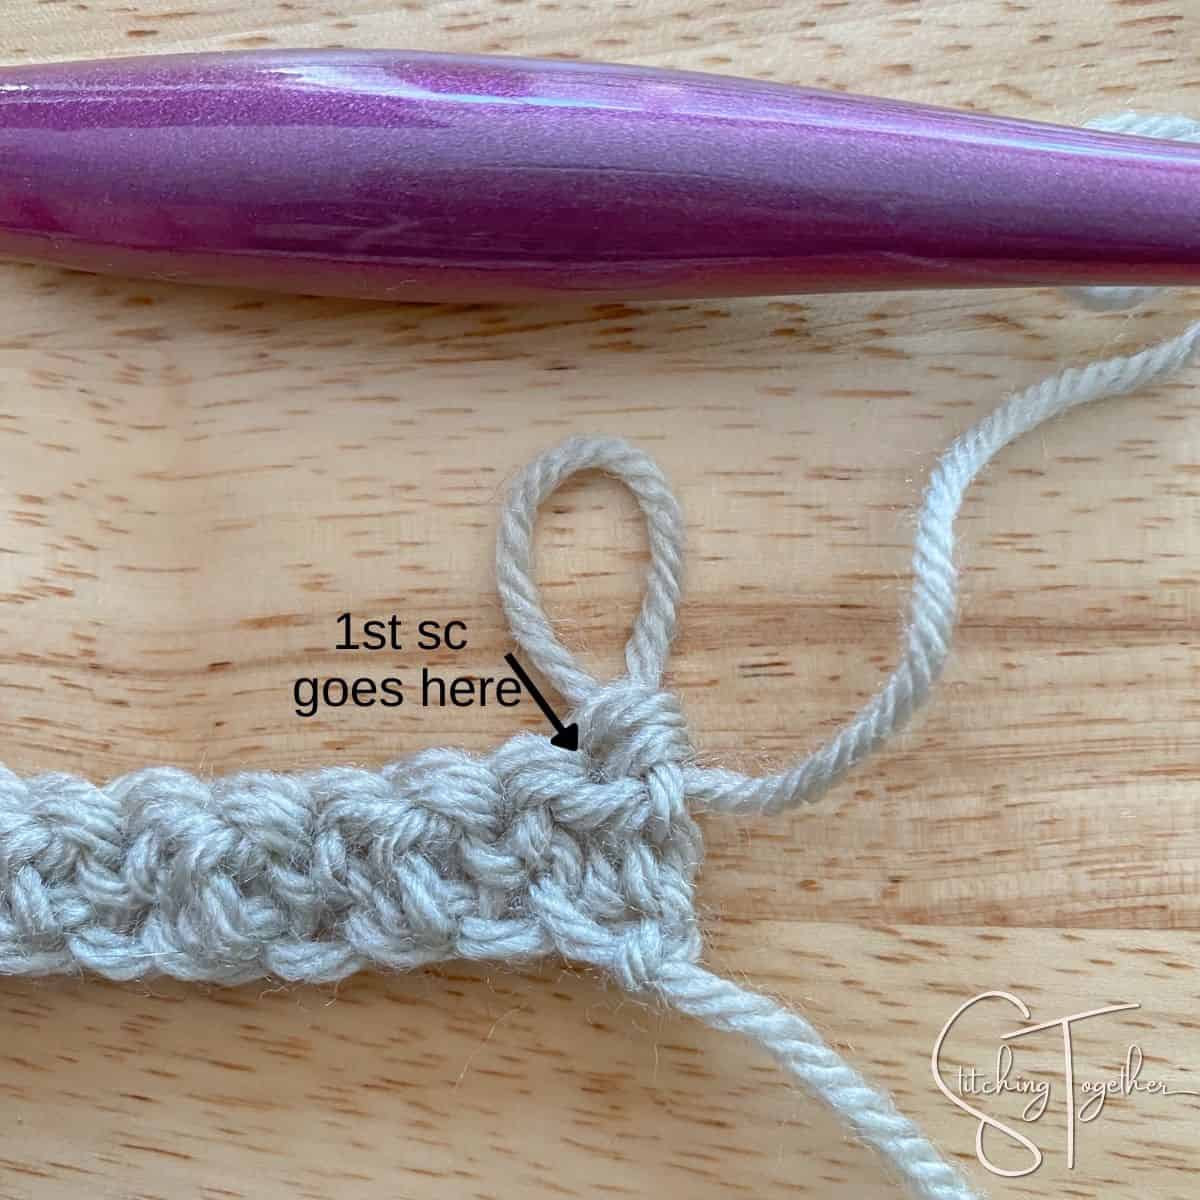 starting row 2 of the lemon peel stitch with an arrow showing where to place the first stitch